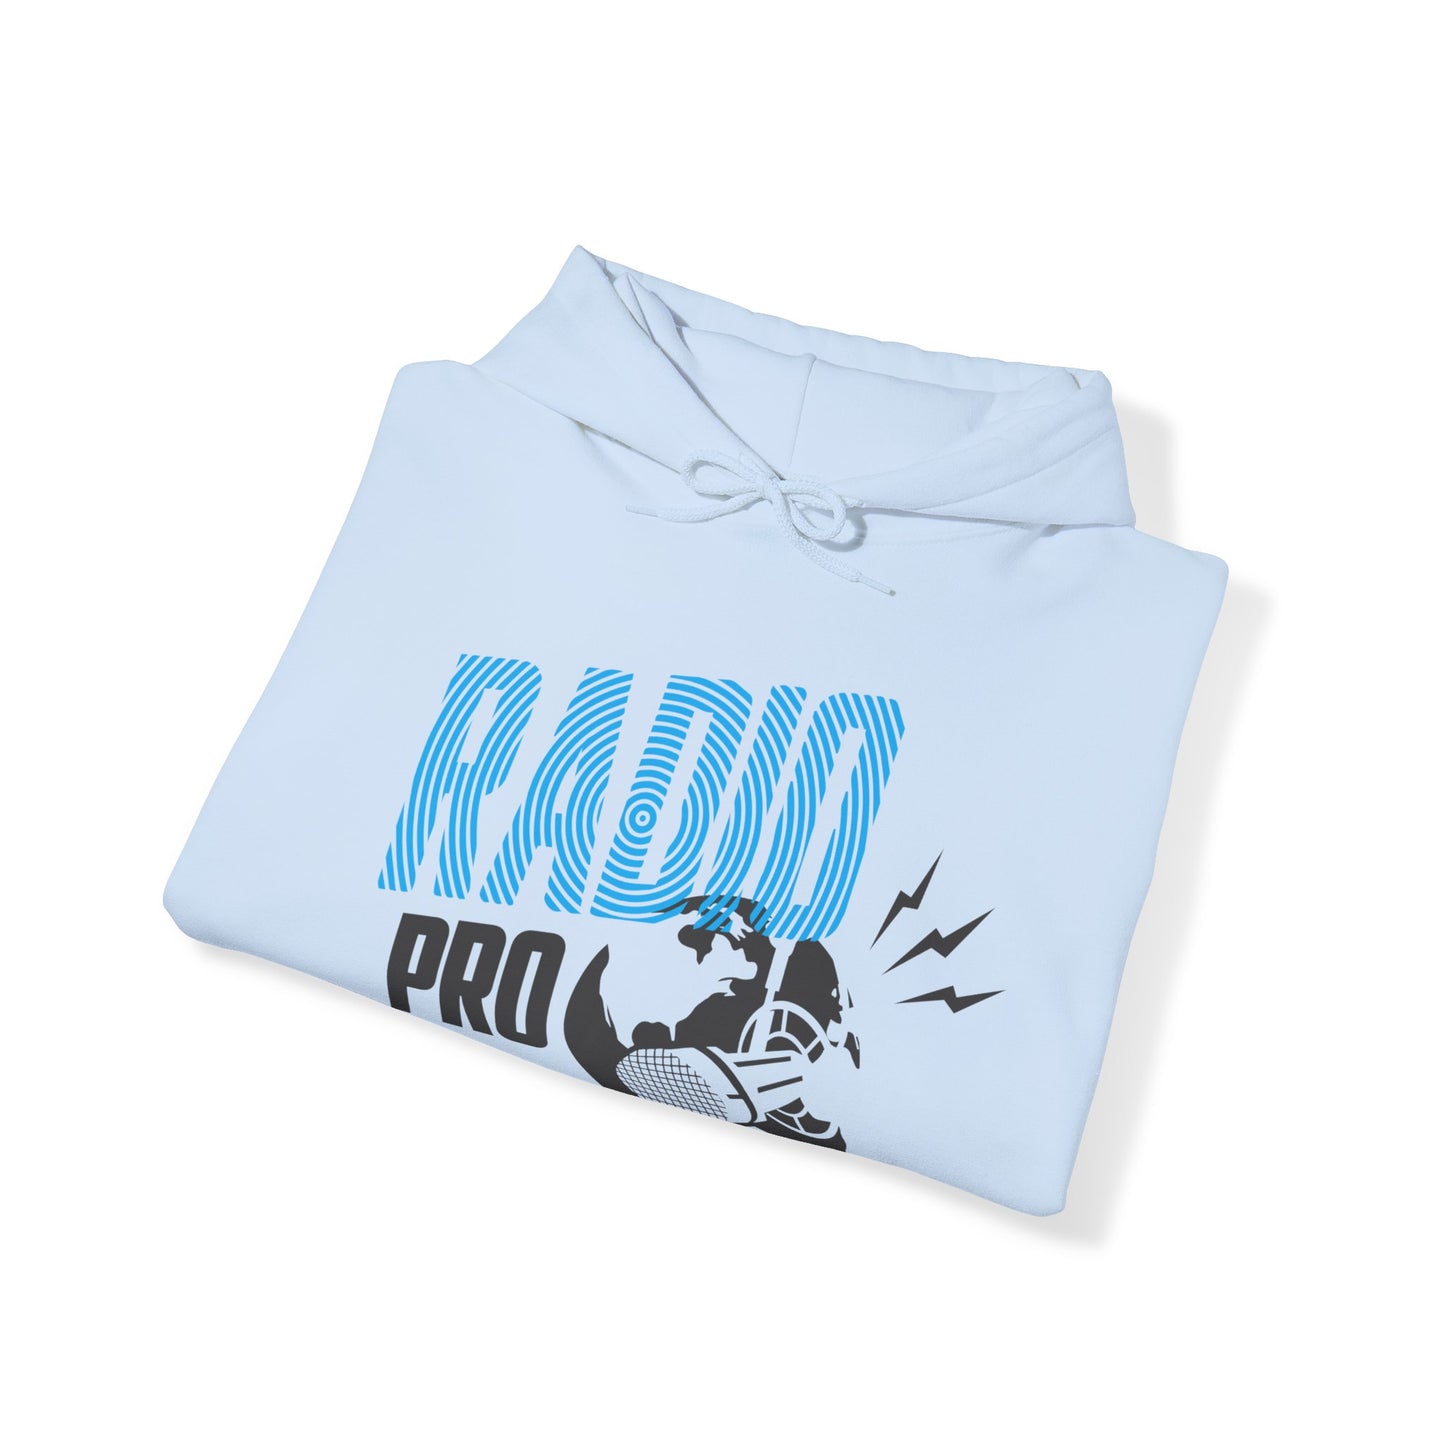 Copy of Radio T-Shirt for Radio DJs and Music Industry pros